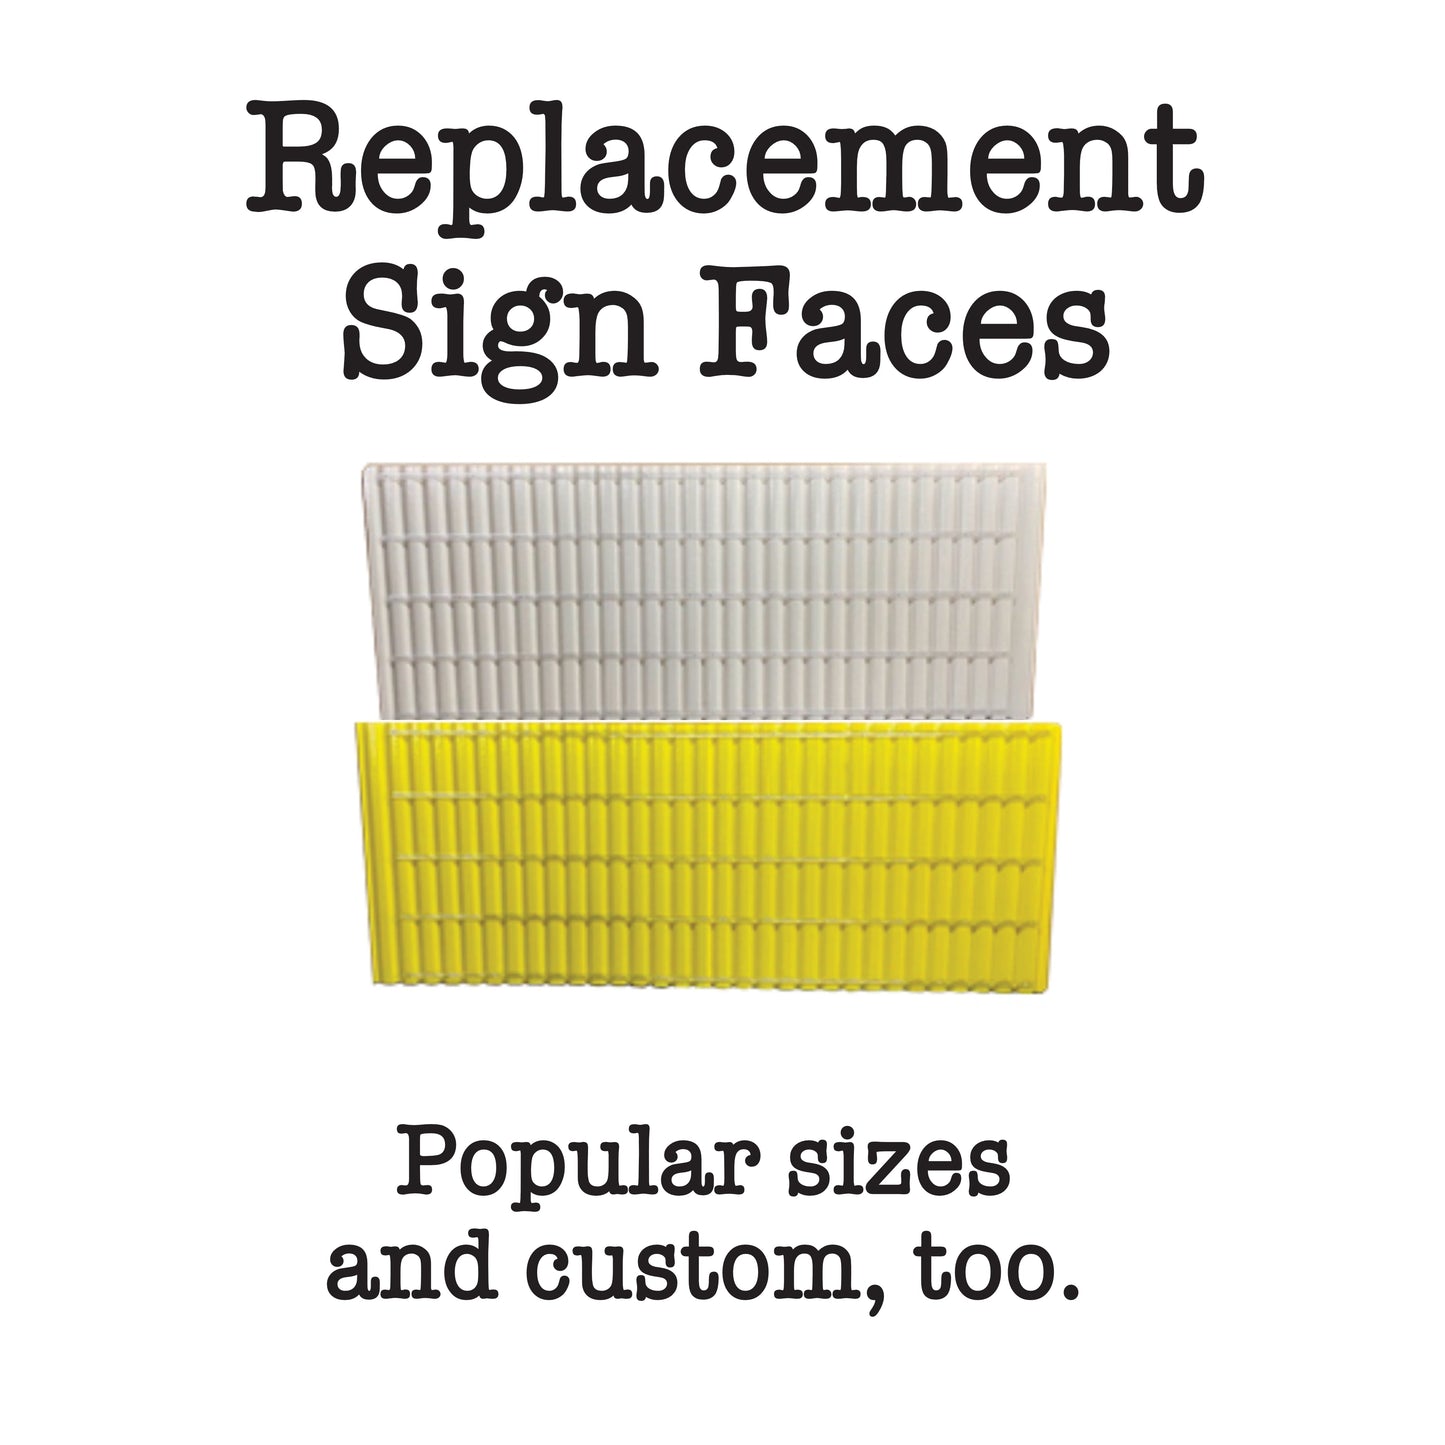 6" Track for 6" Flex Letters on Replacement Fiberglass v3 Sign Faces